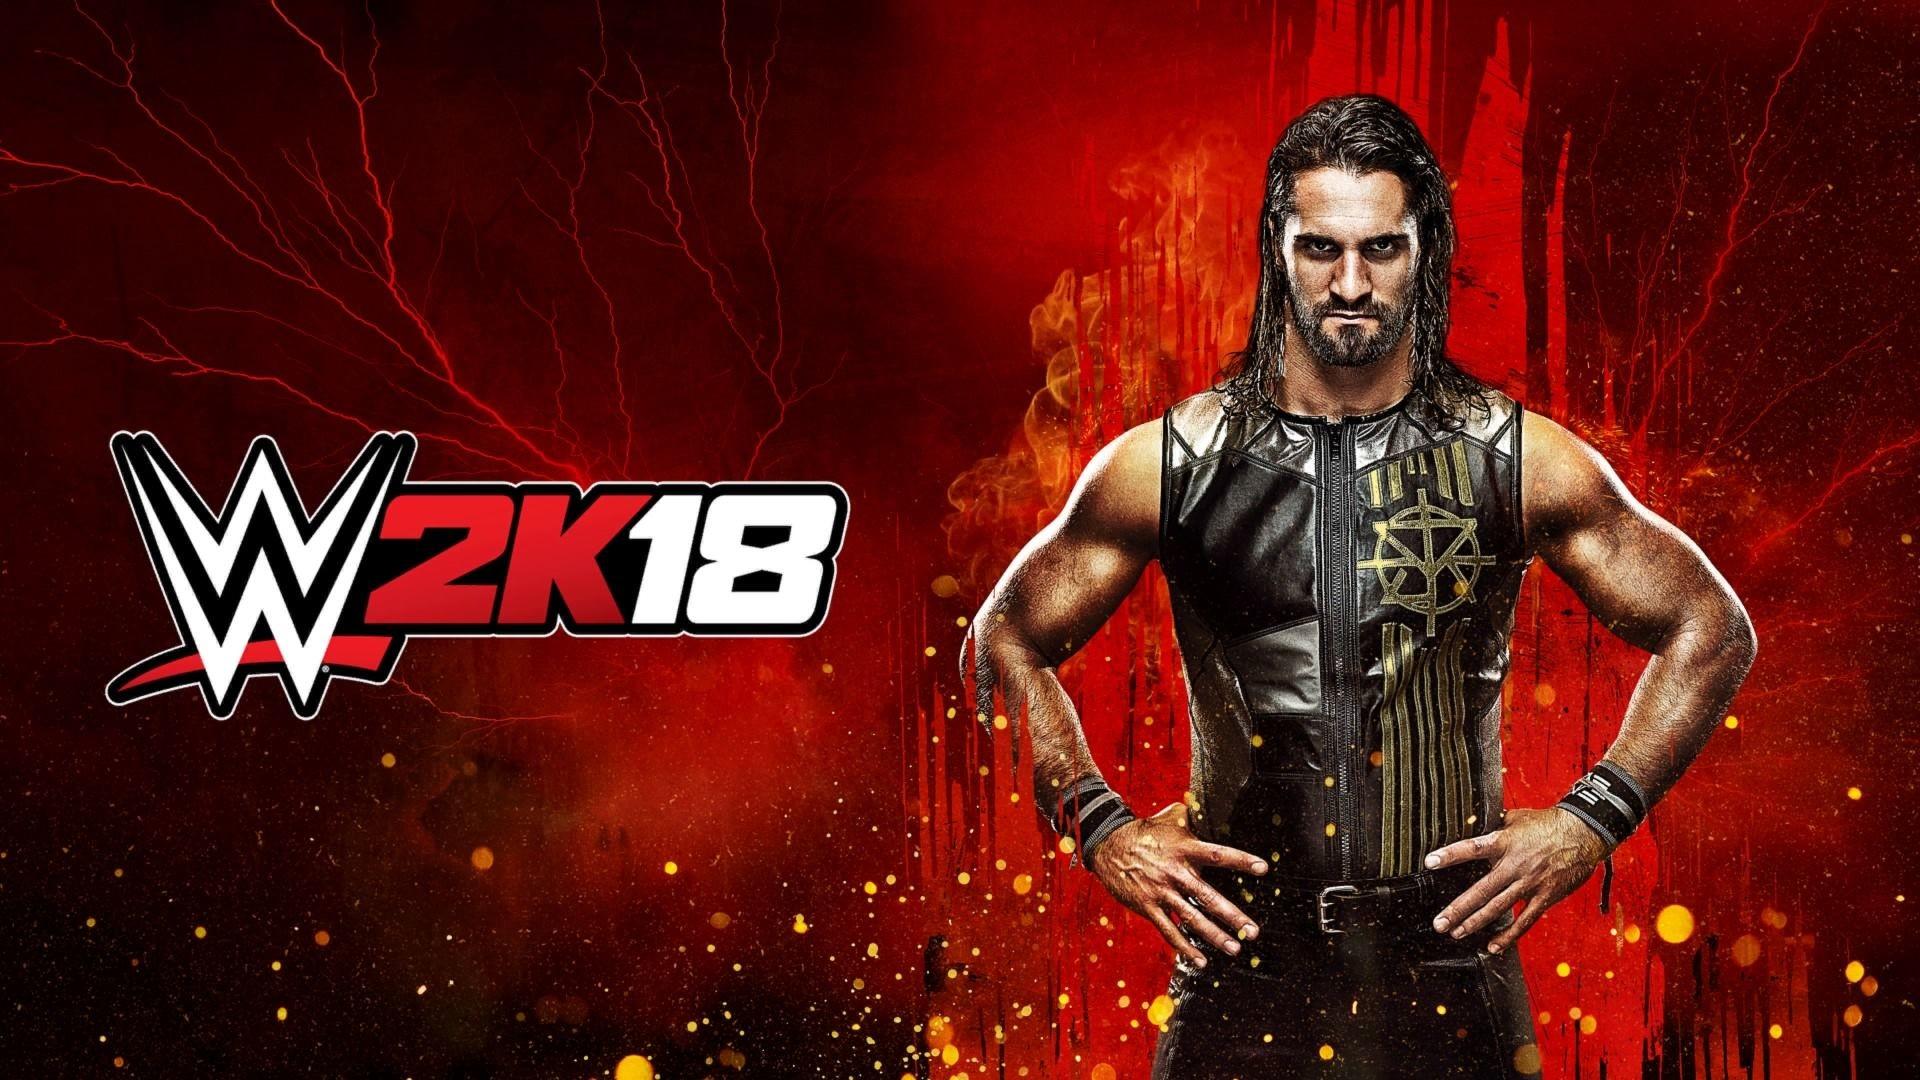 Wwe 2K18 Wallpaper background picture